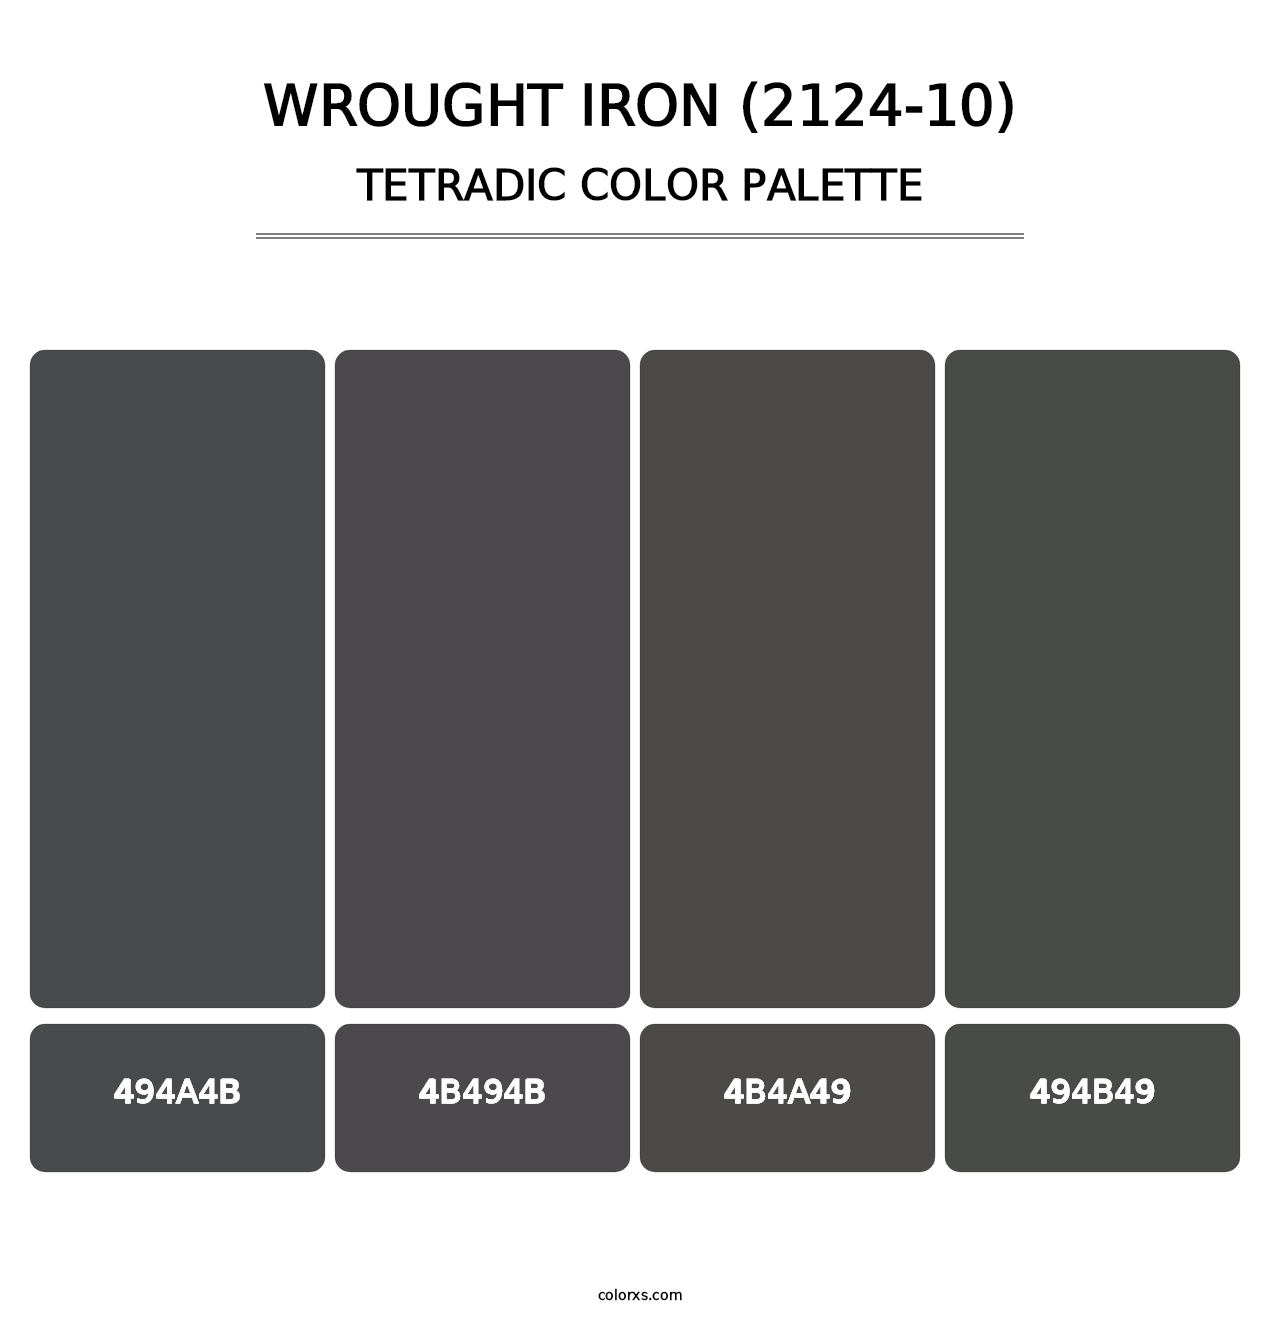 Wrought Iron (2124-10) - Tetradic Color Palette